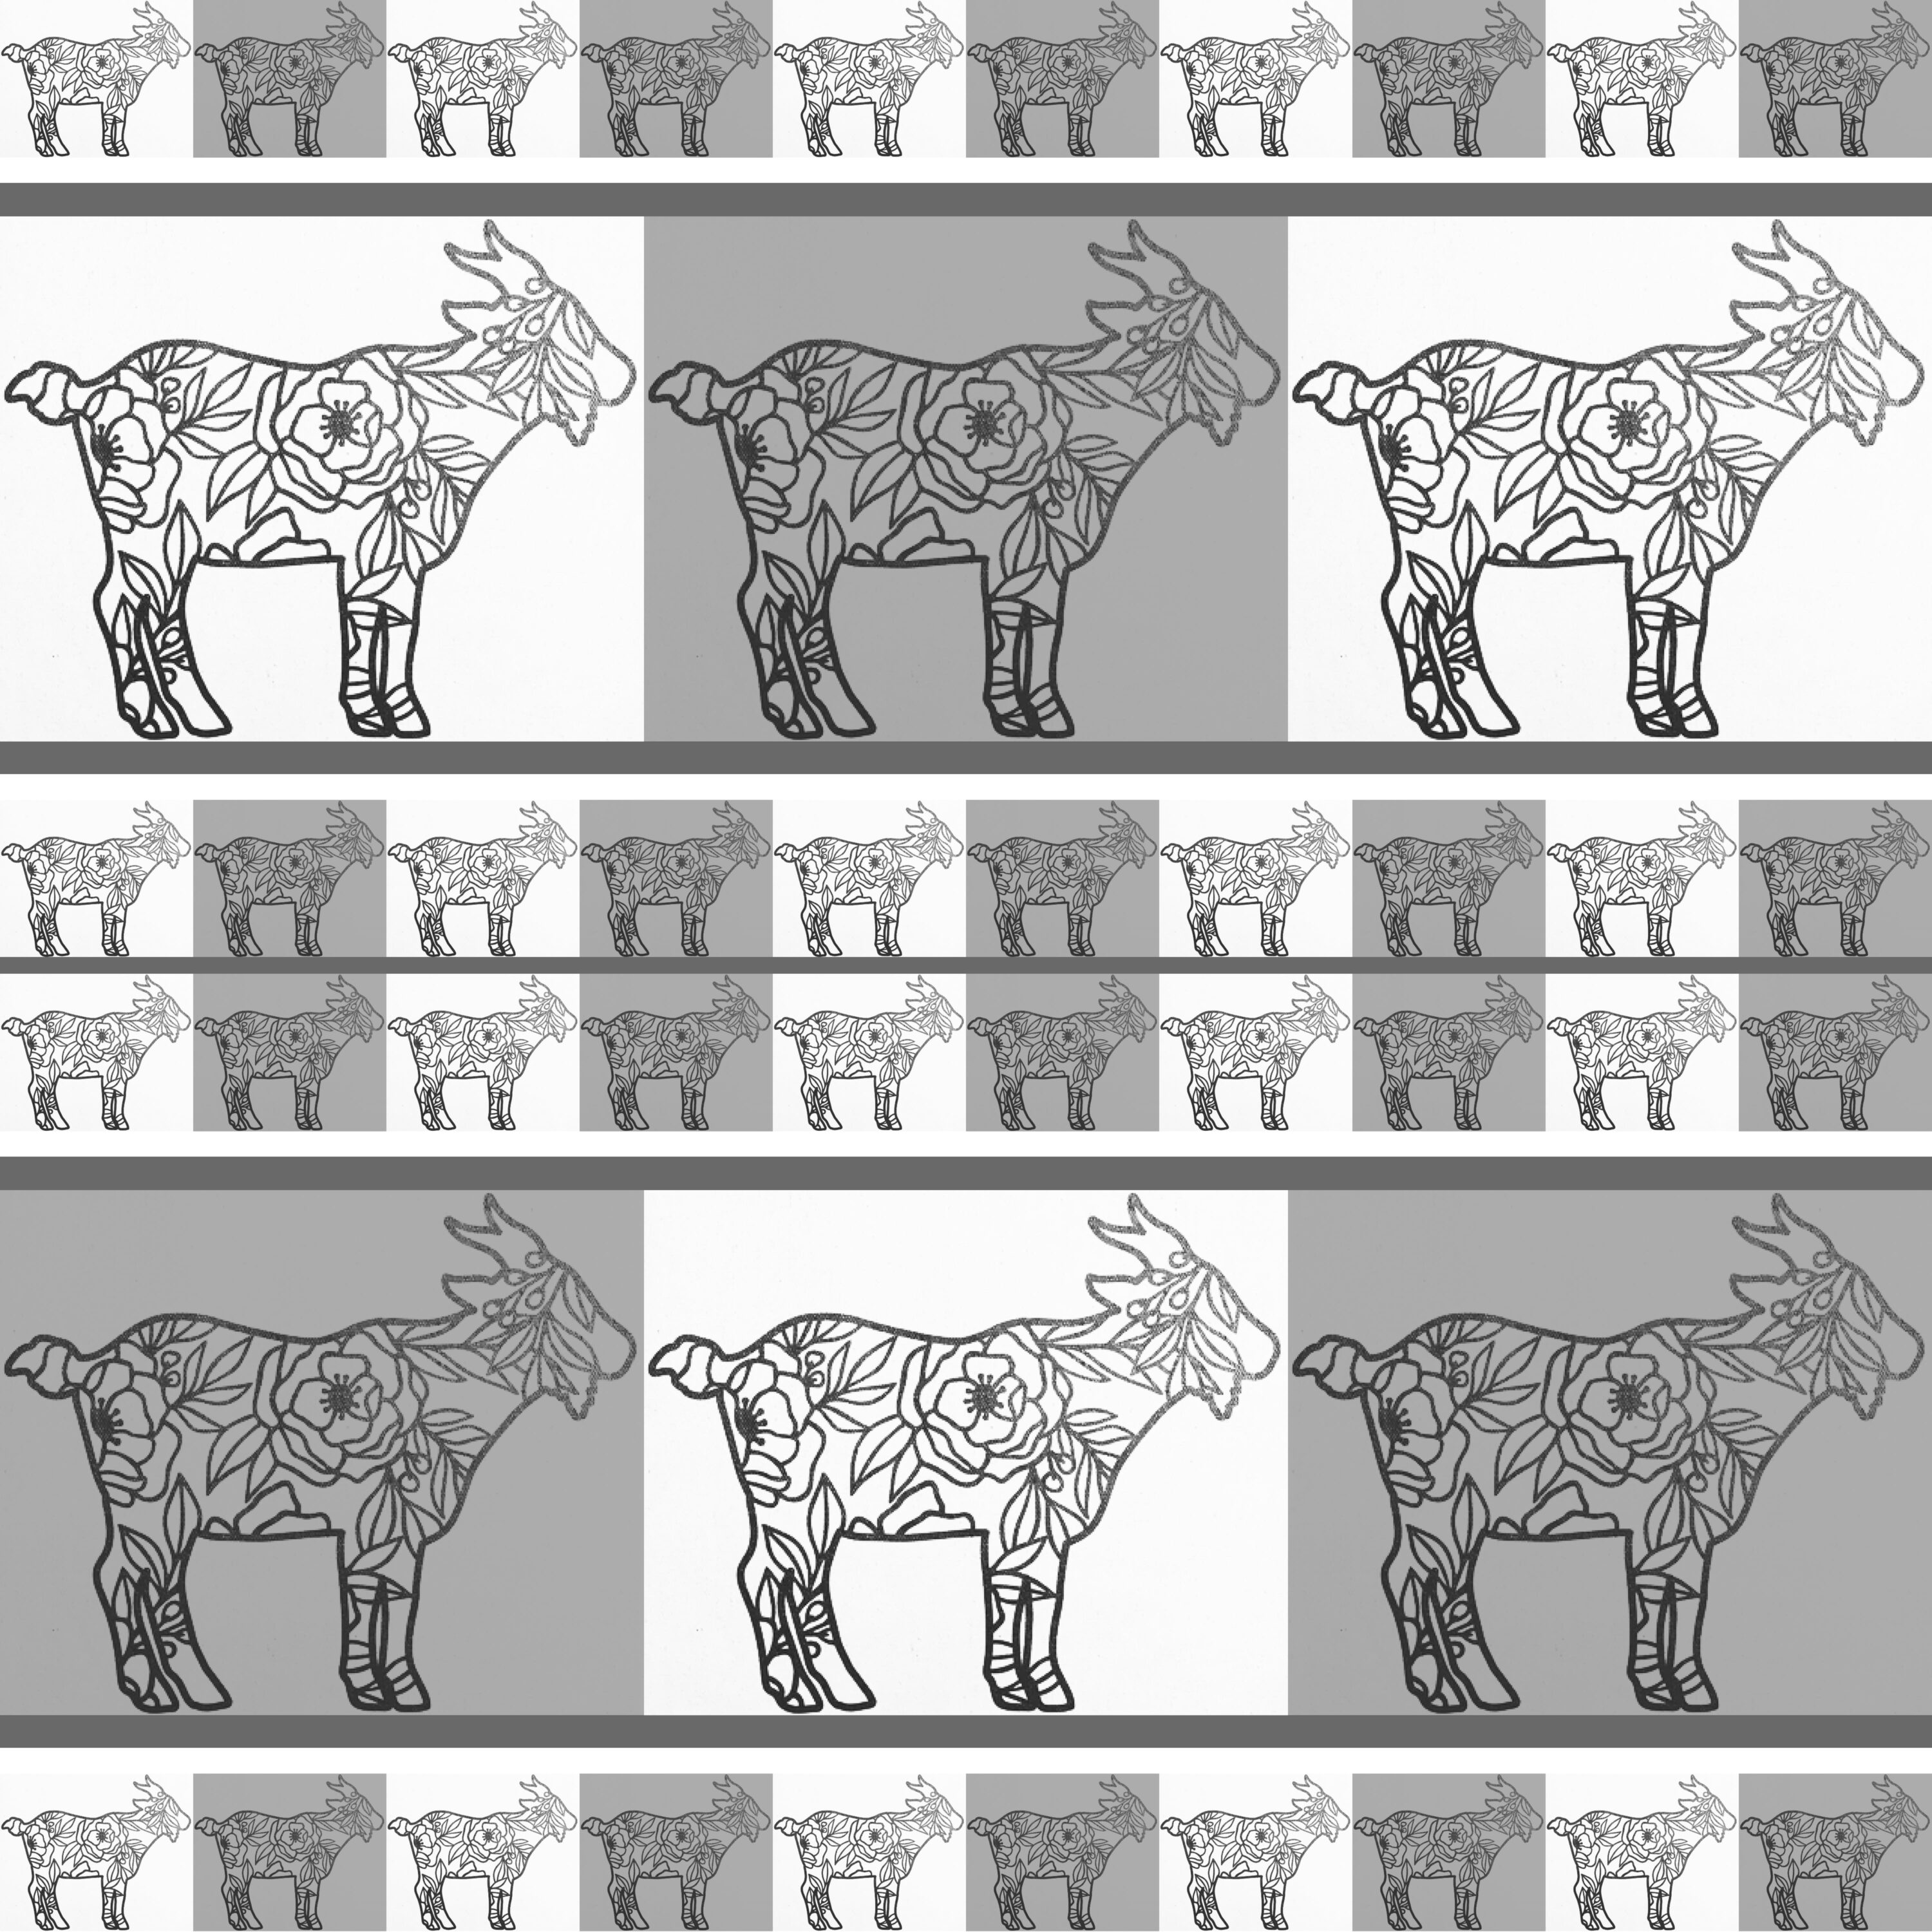 Drawing of a cow with different patterns on it.